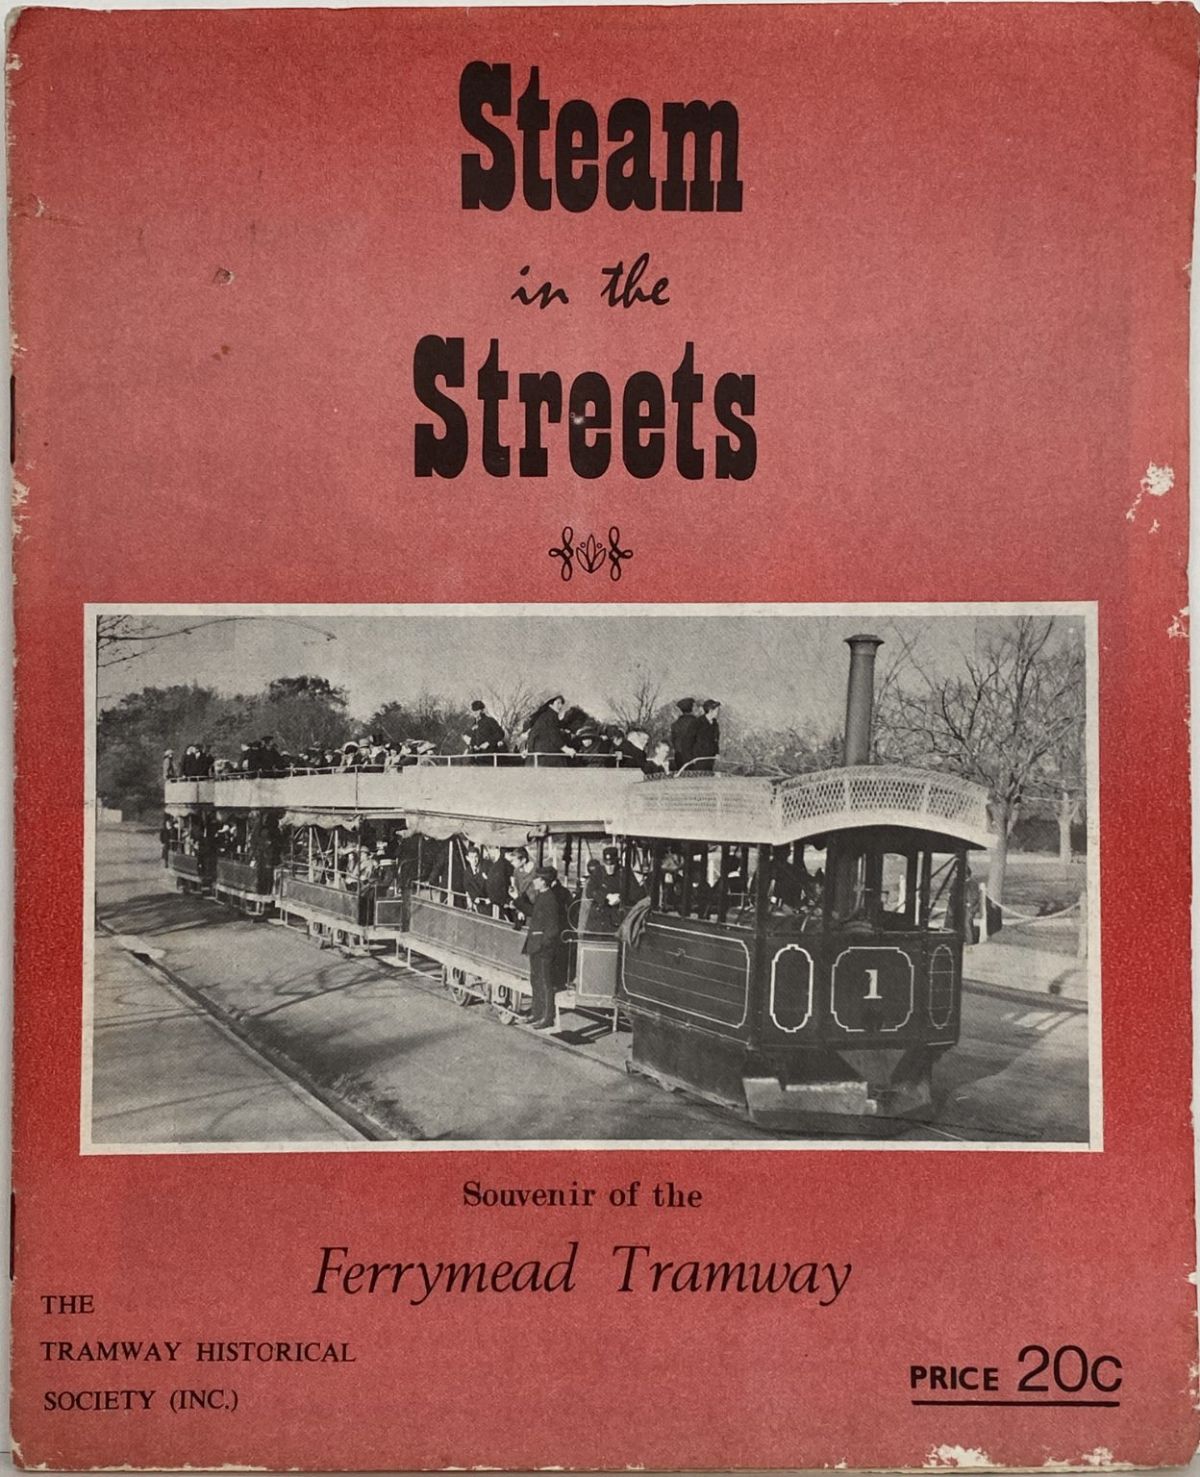 STEAM IN THE STREETS: Souvenir of the Ferrymead Tramway